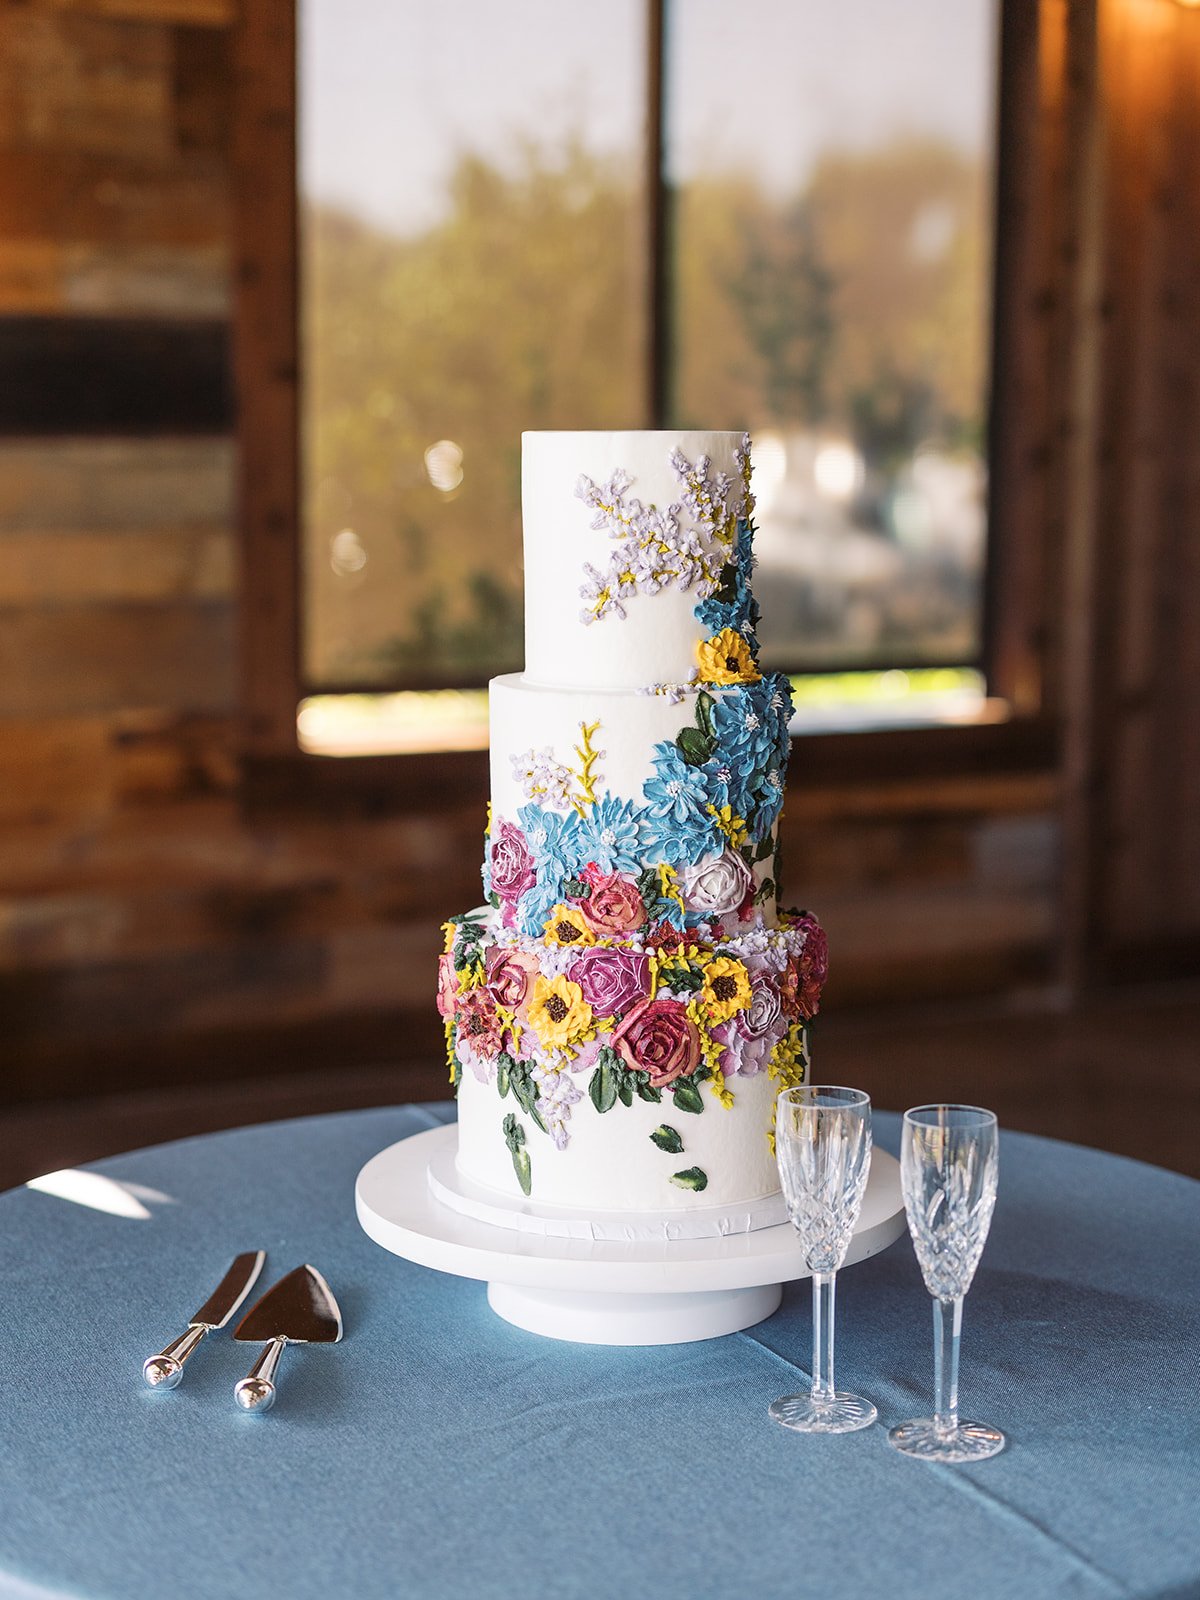 Colorful wildflower wedding cake designed by Ranch wedding planner Shannon Rose events